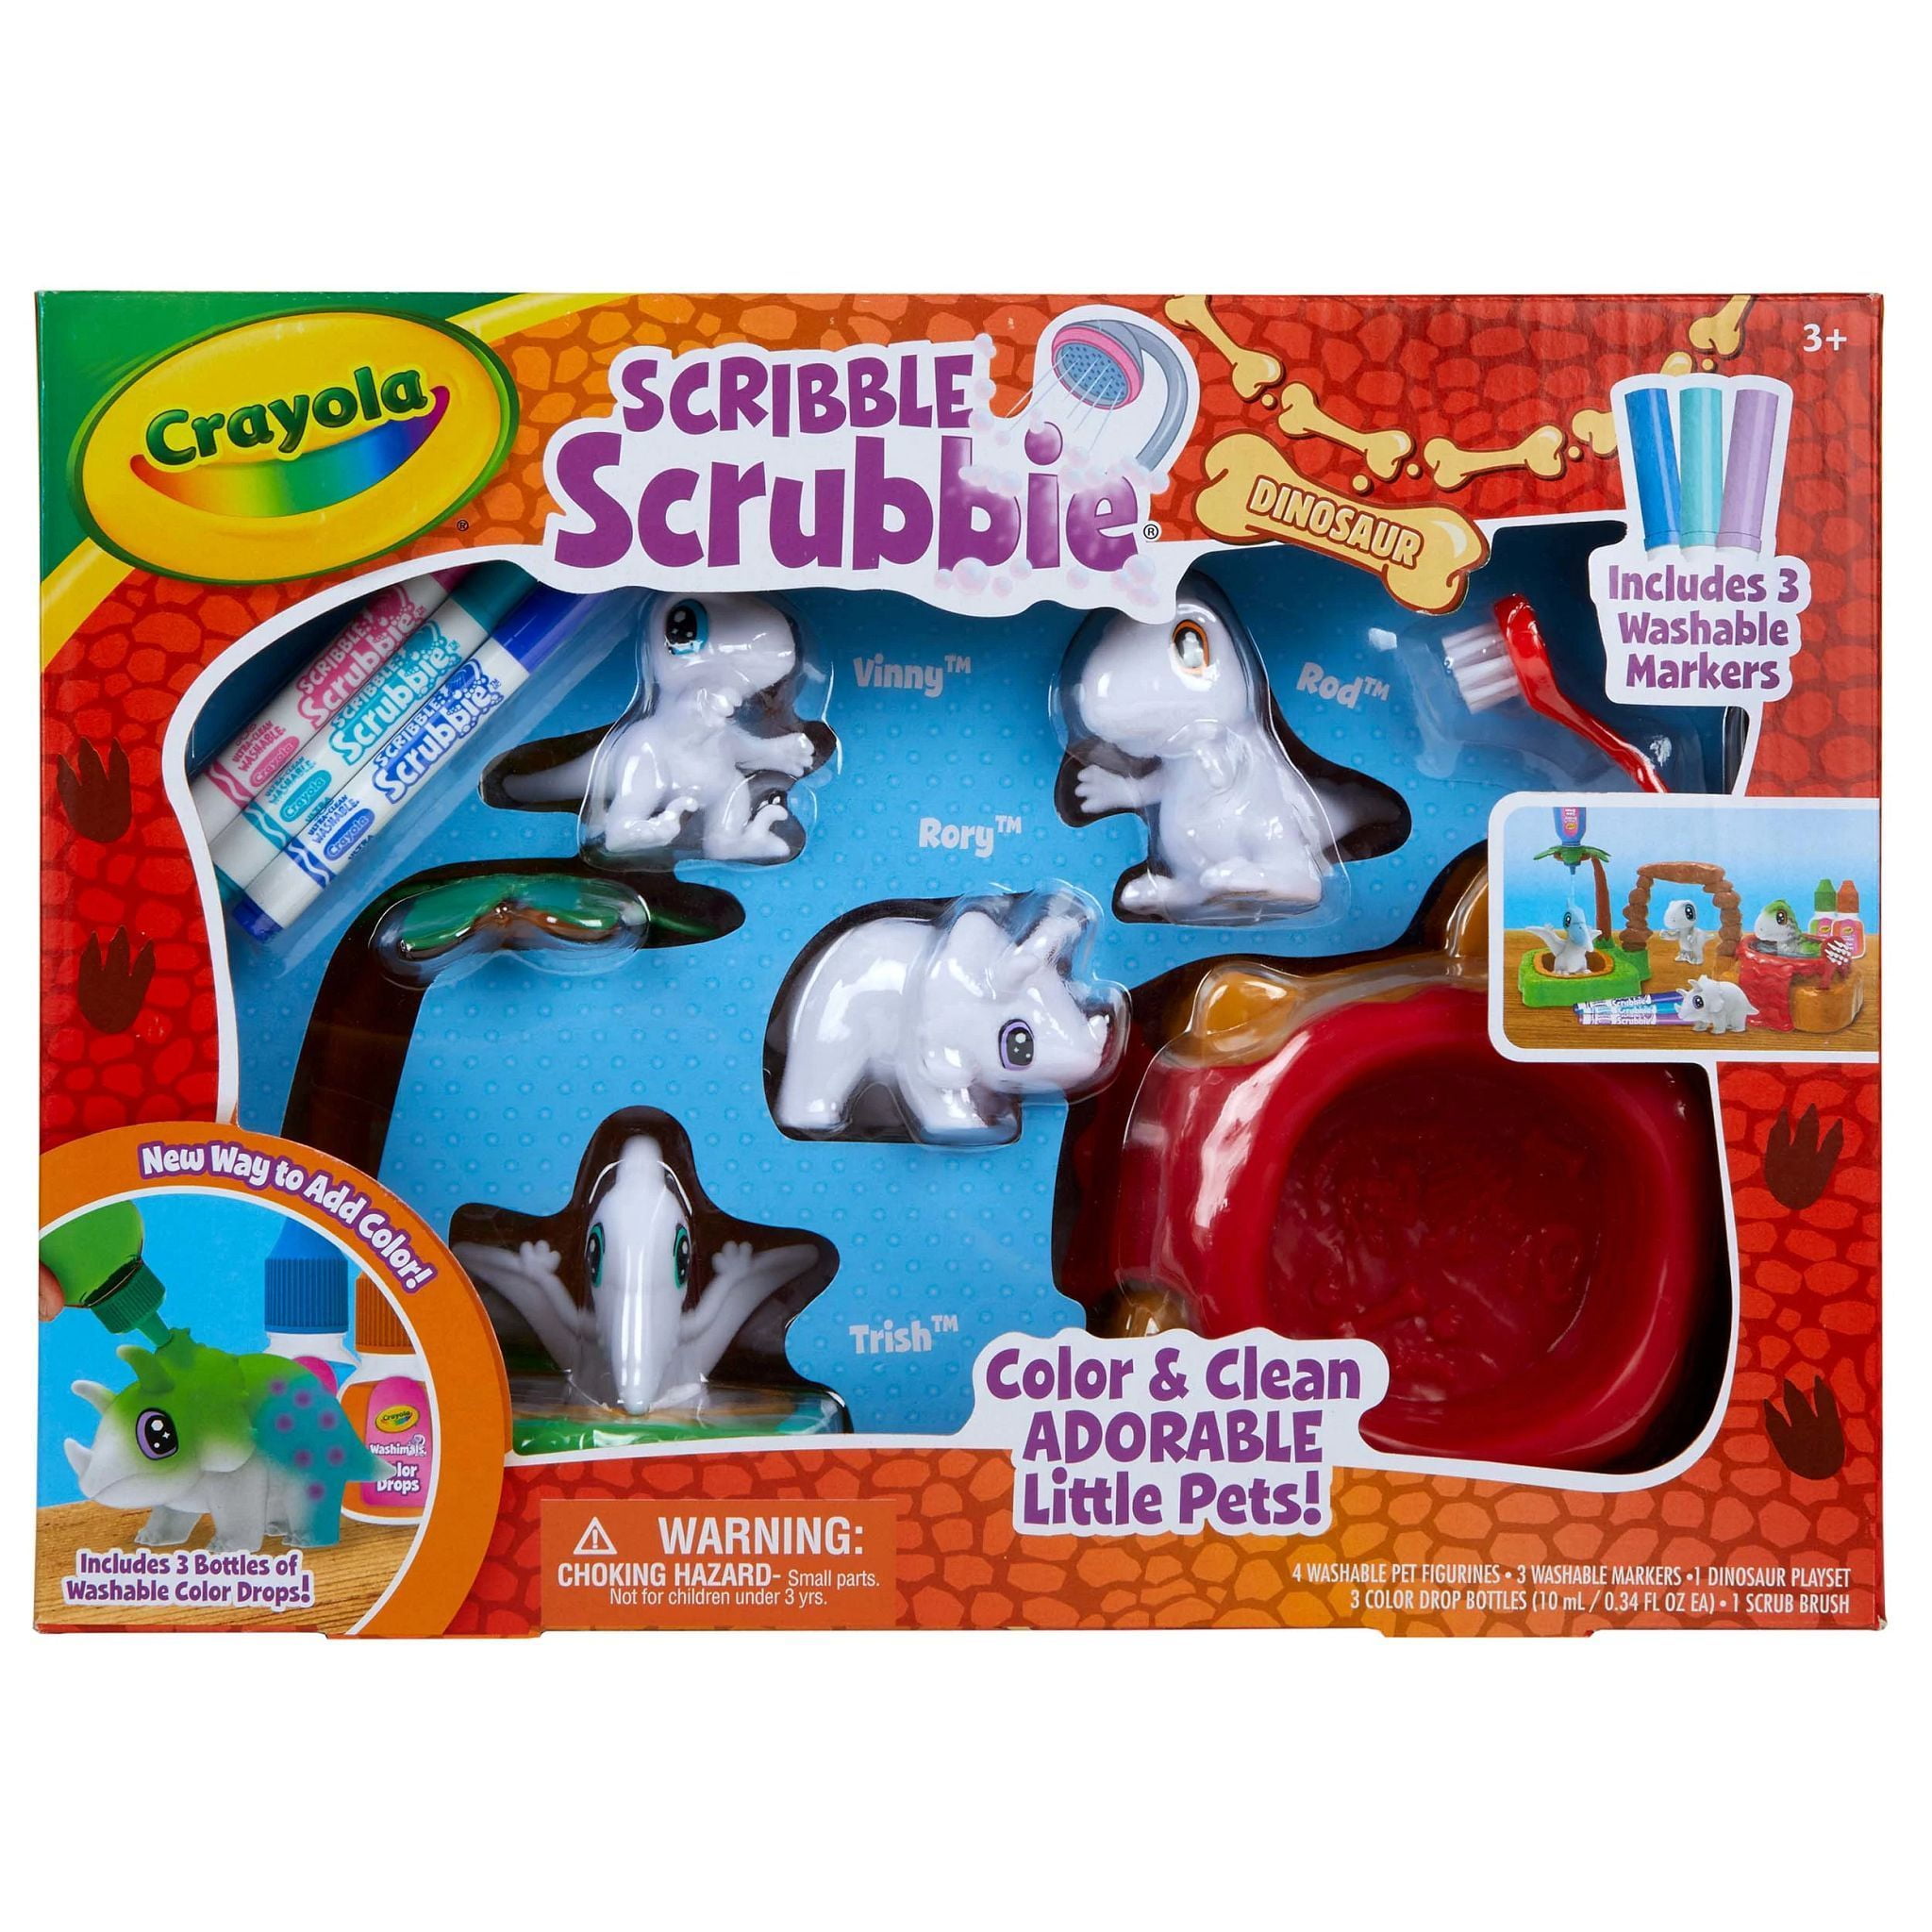 Crayola Scribble Scrubbie Dino Island Playset, Holiday Gift, Dino Toys for Kids 3+